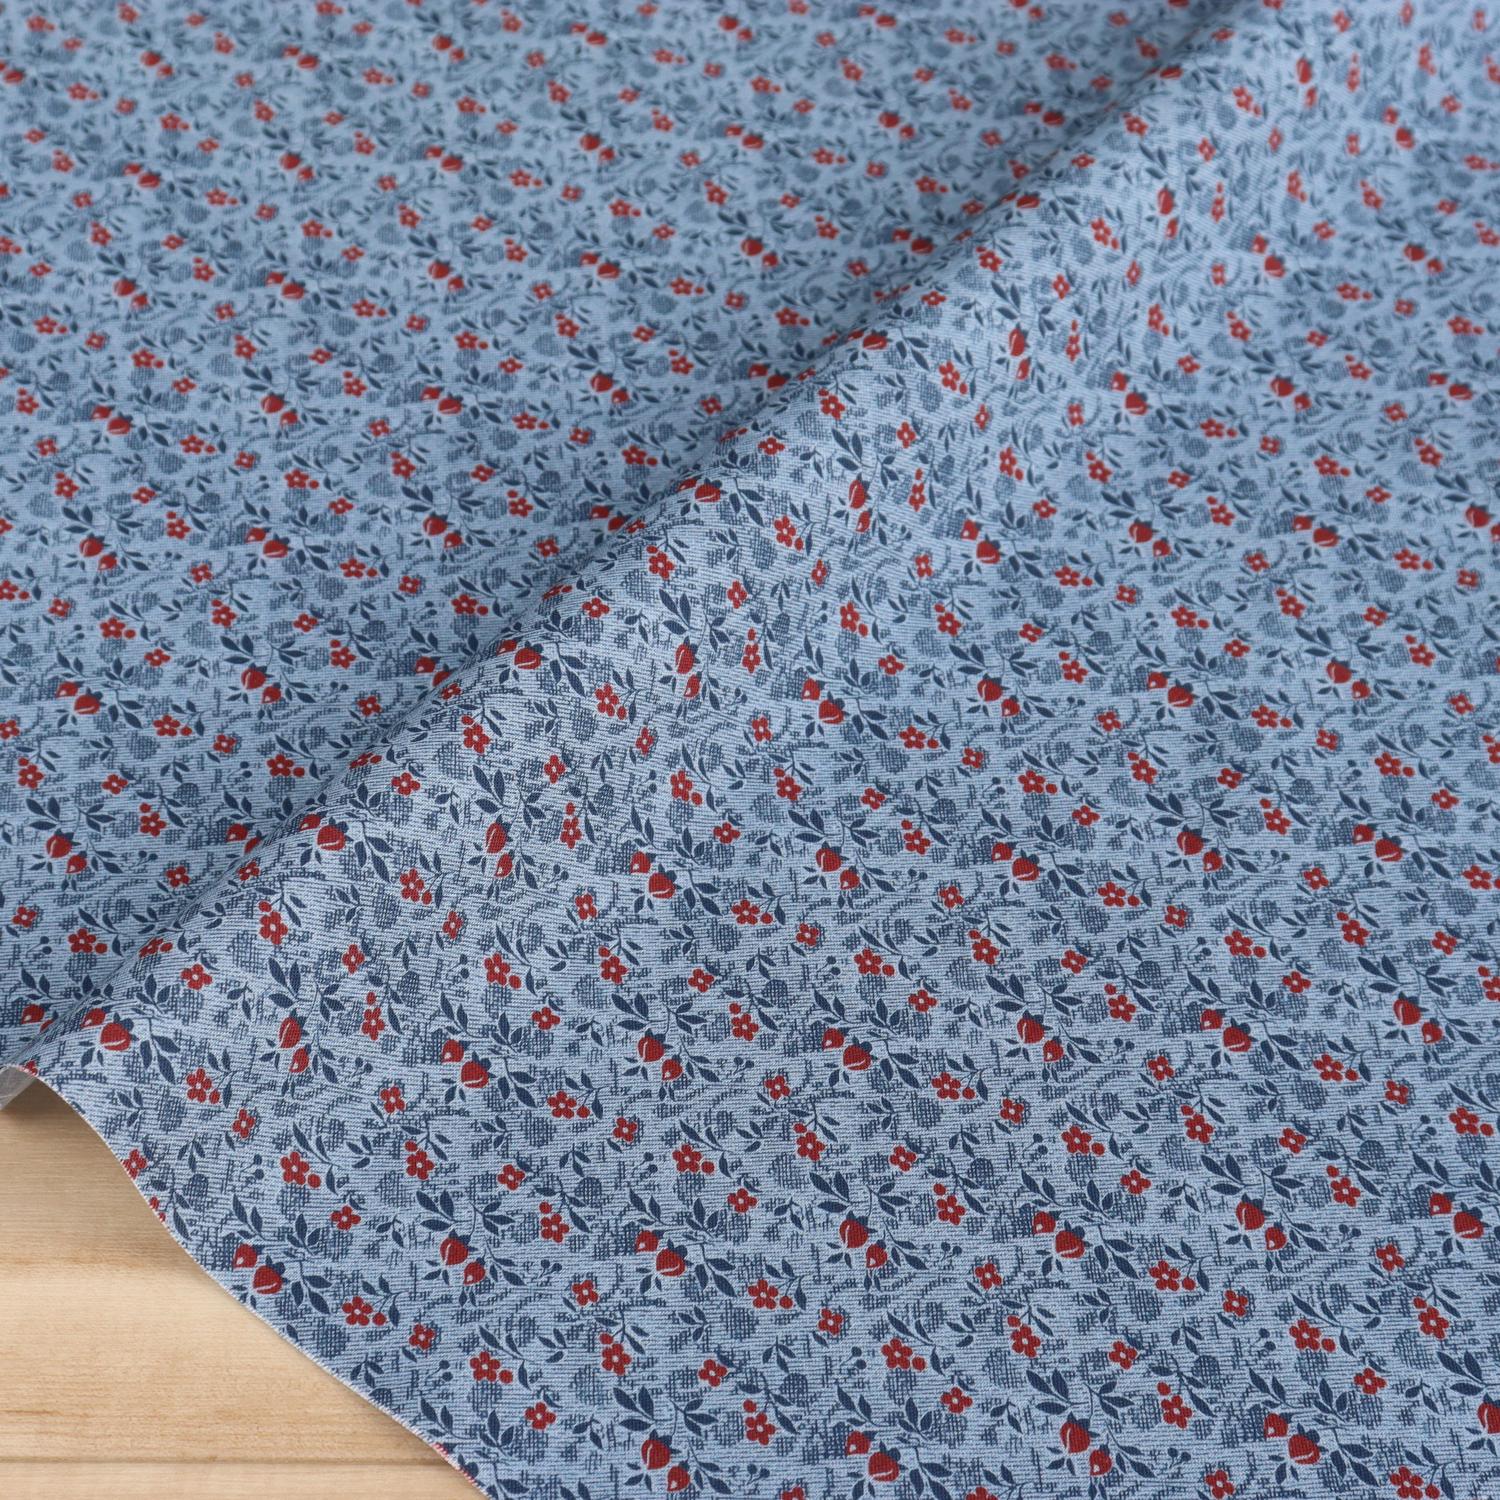 TIME-CD2112-B Small Floral Pattern Blue Ground TimeLess Treasures USA Print Fabric 1m Unit (m)